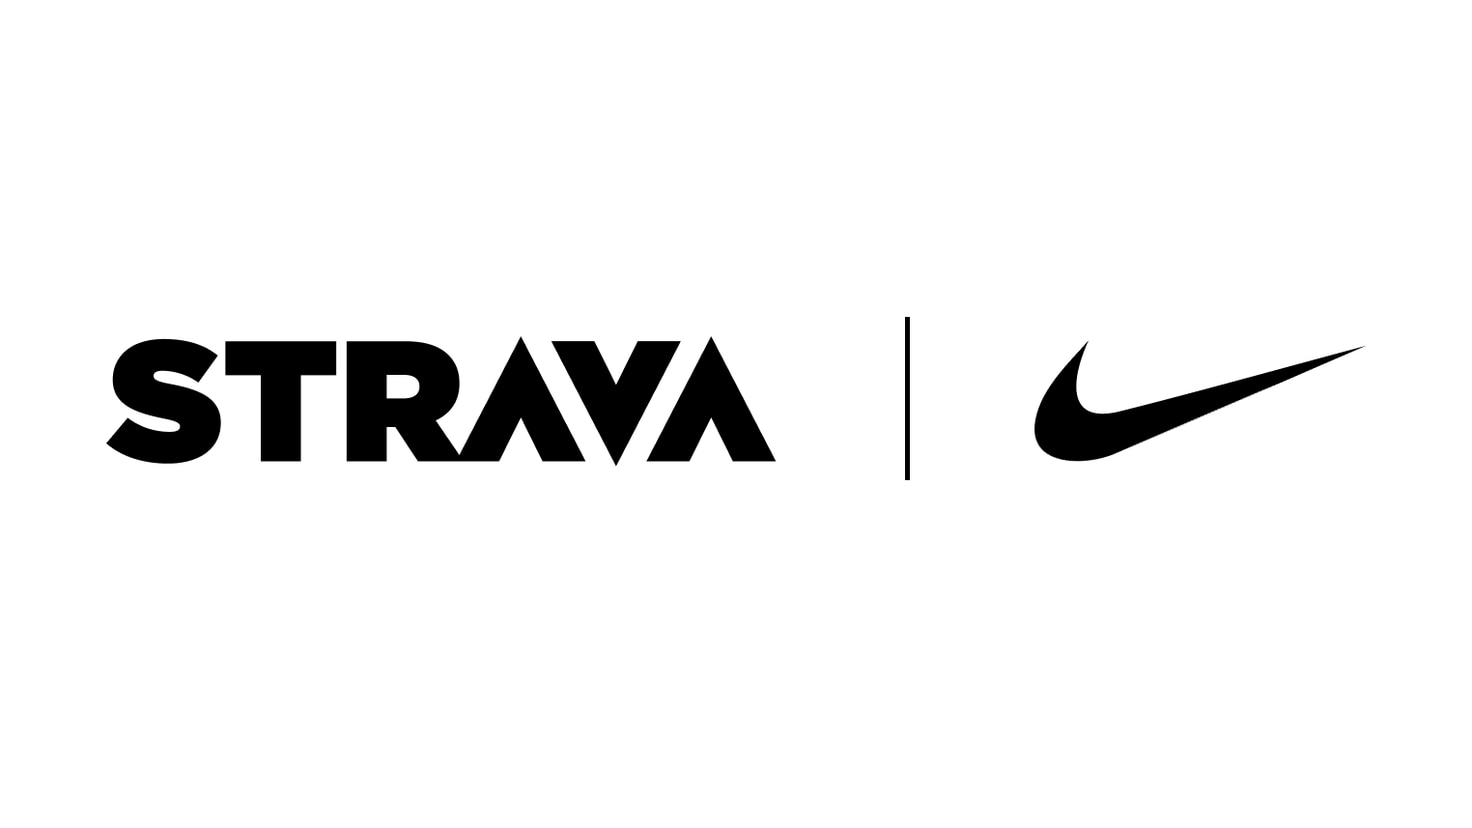 Strava and Nike are committed to connected sports
